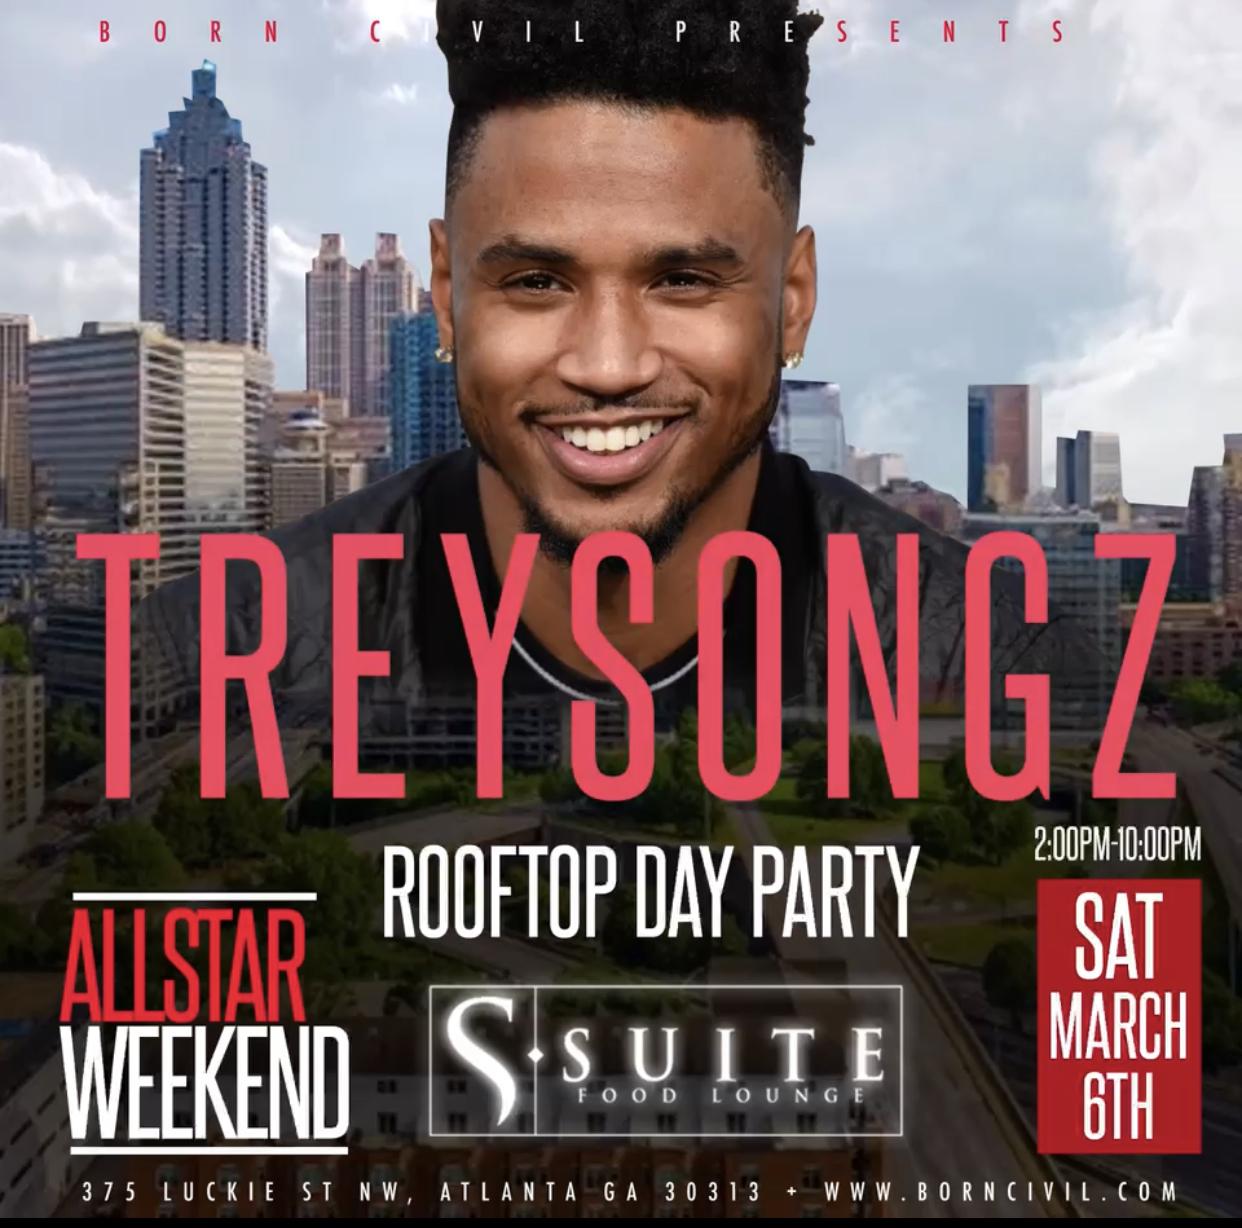 R&B crooner Trey Songz is hosting a rooftop party at this destination. Come Through! All Star Weekend